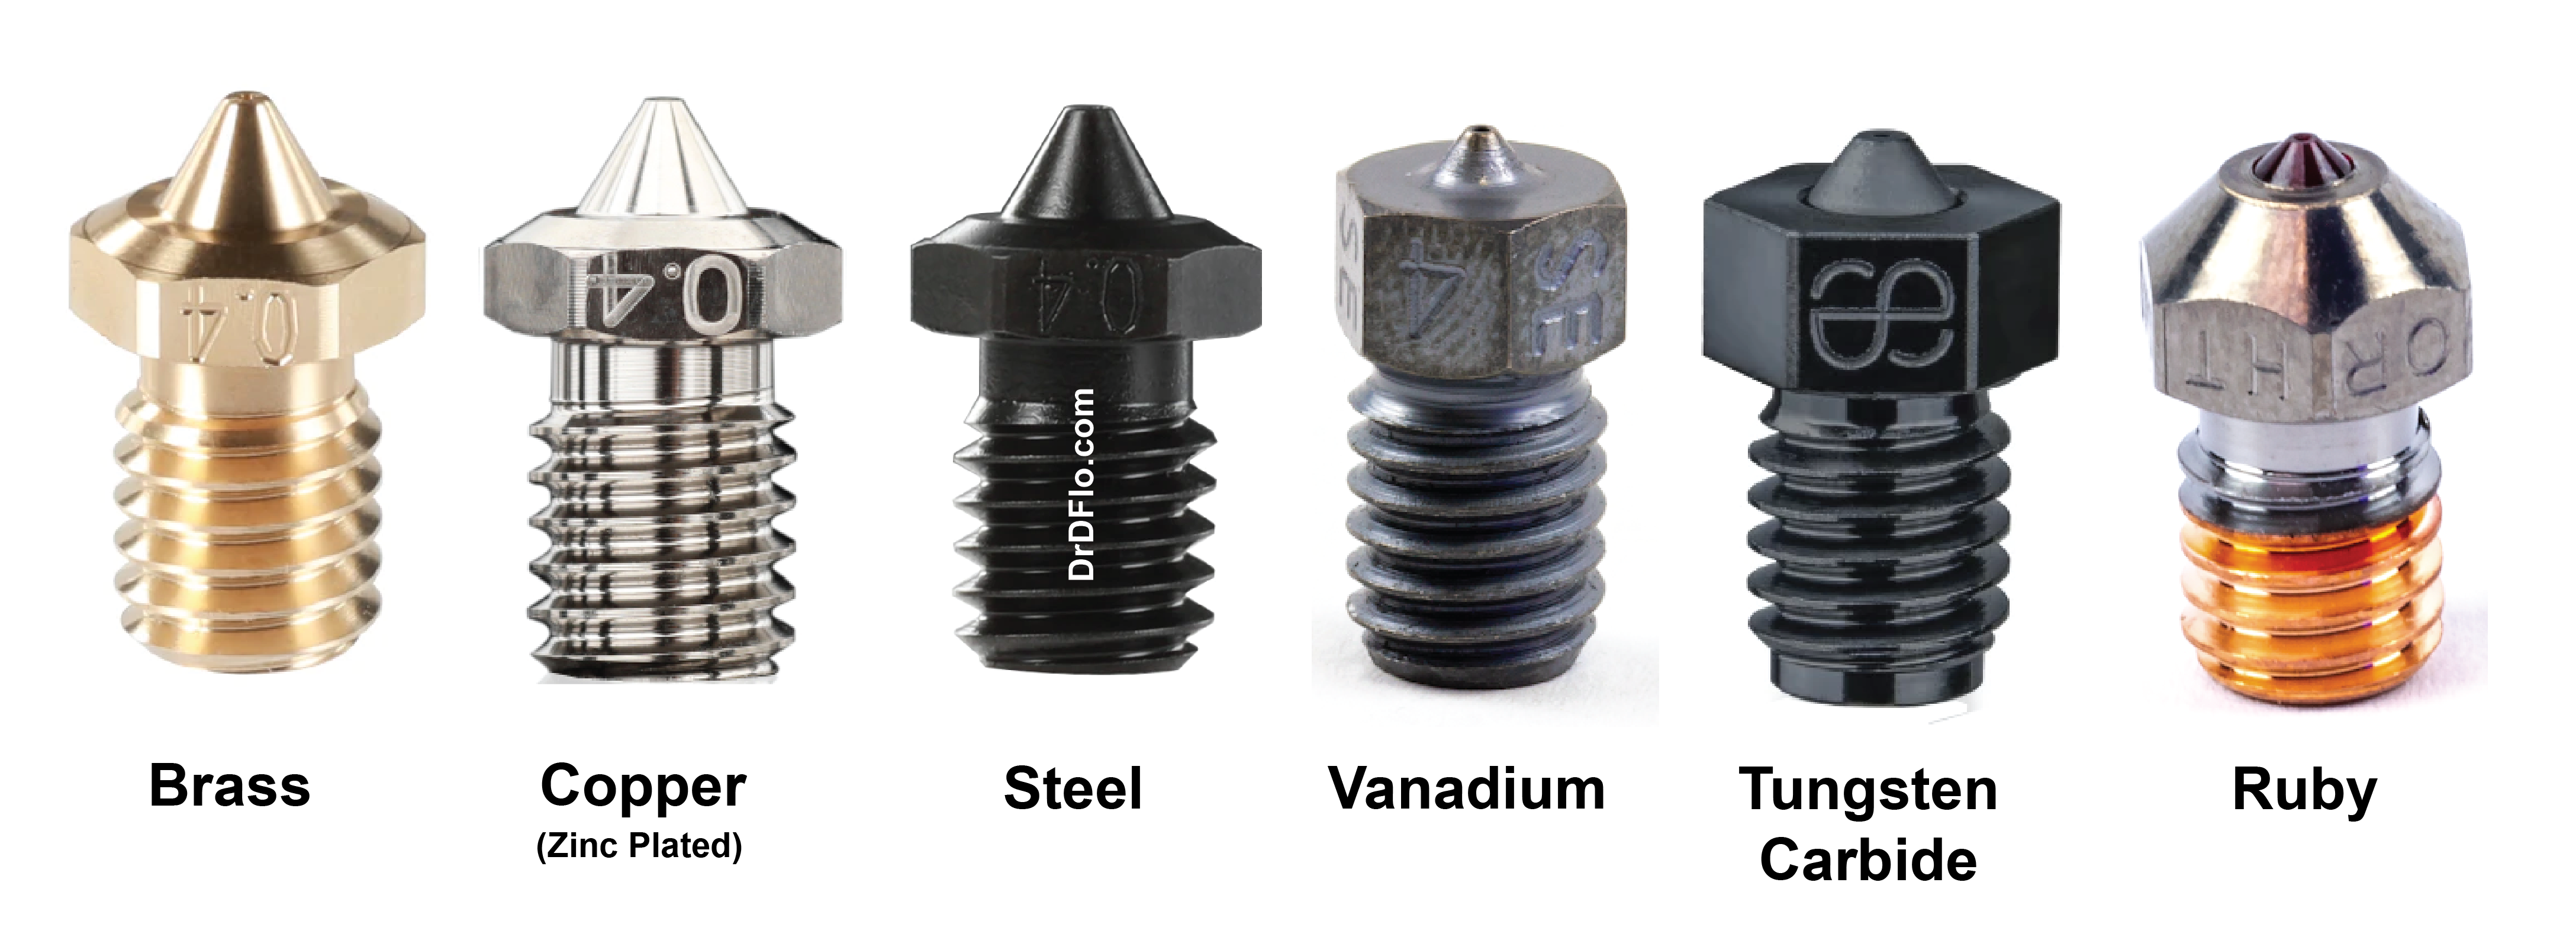 Different 3D printer nozzle materials, including brass, zinc plated copper, steel, vandium, tungsten carbide, and ruby